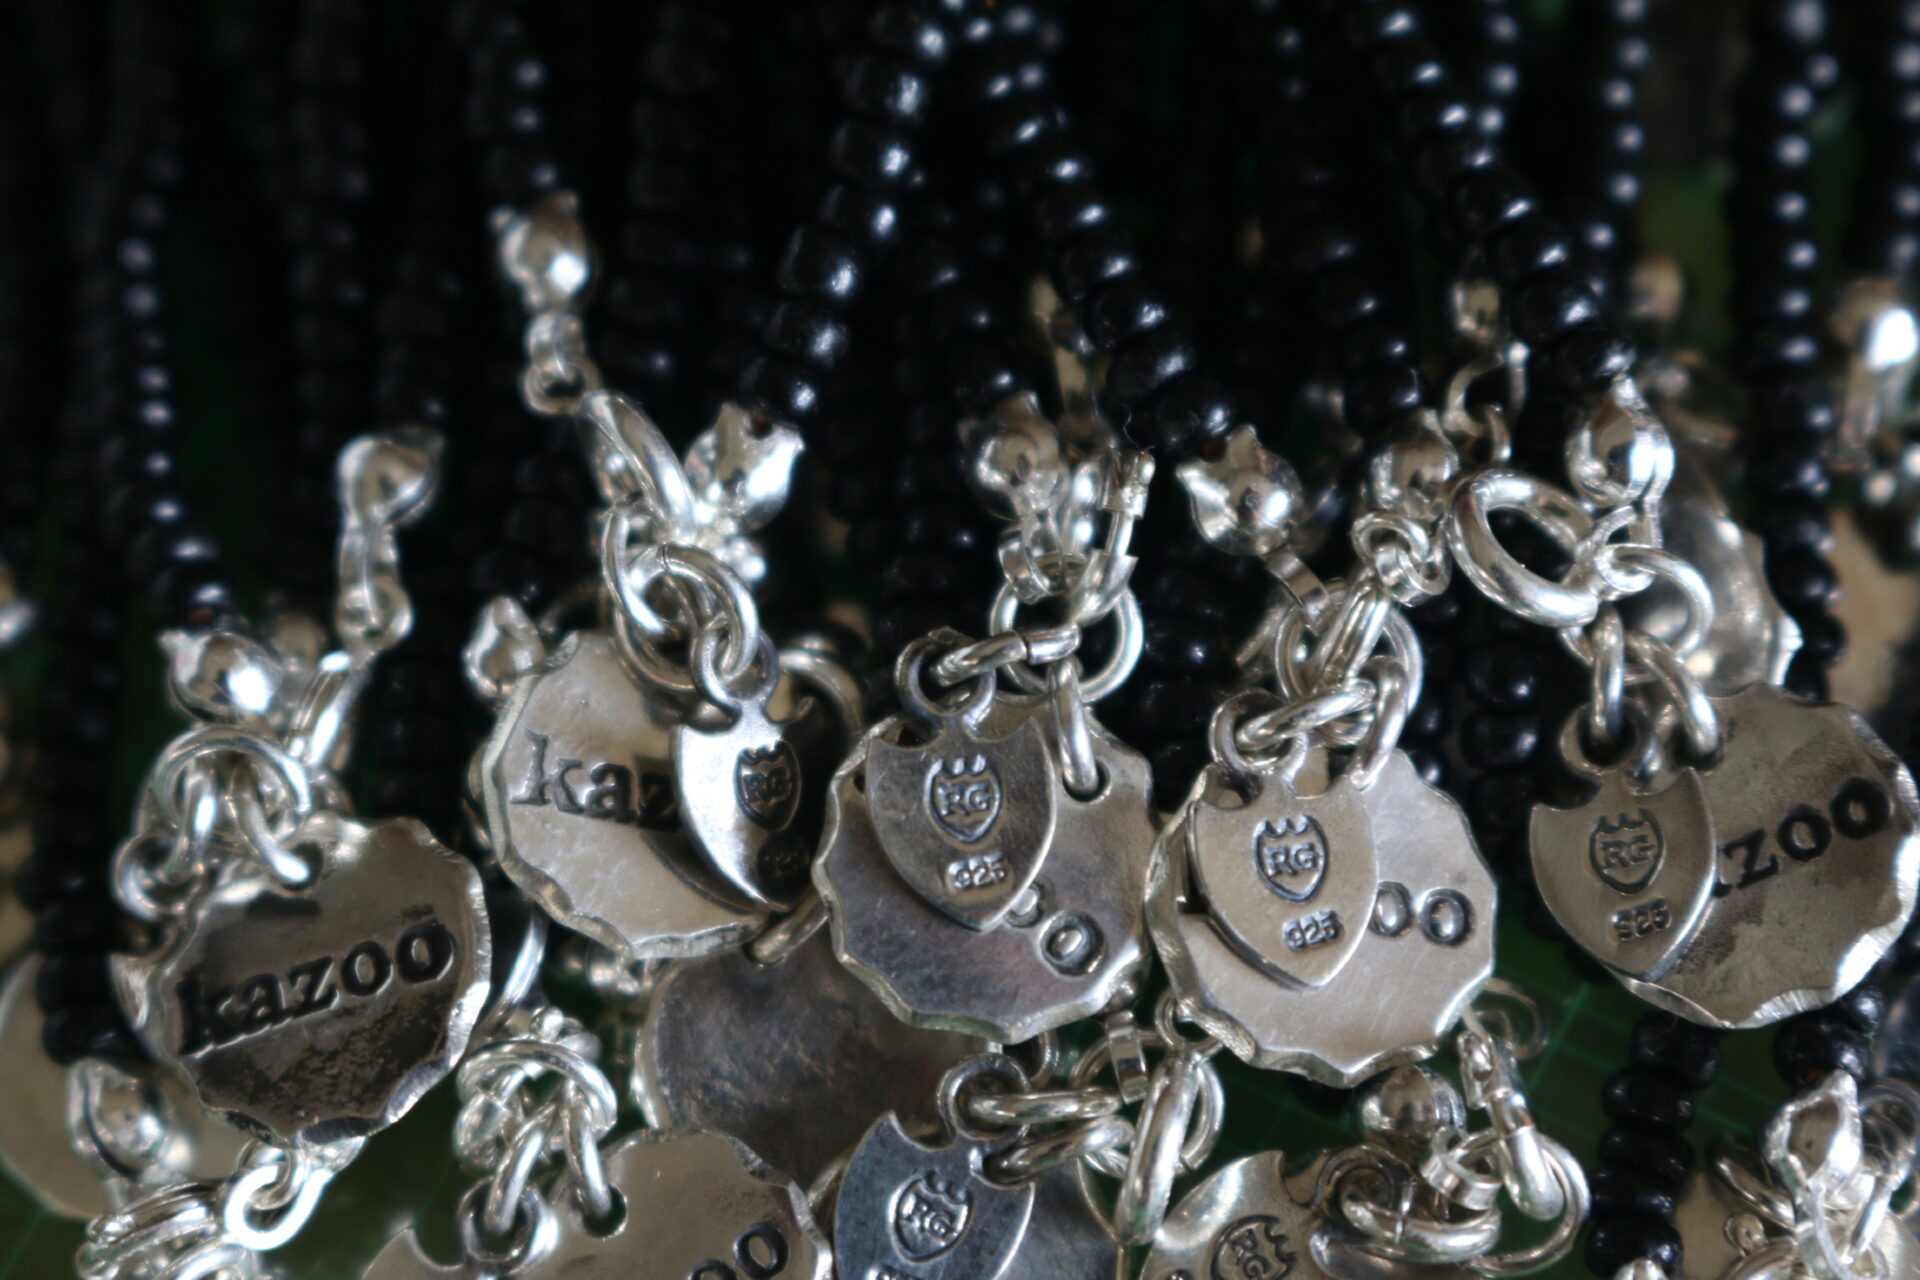 COLLABORATION NECKLACE RUDE GALLERY × kazoo Silver Tag